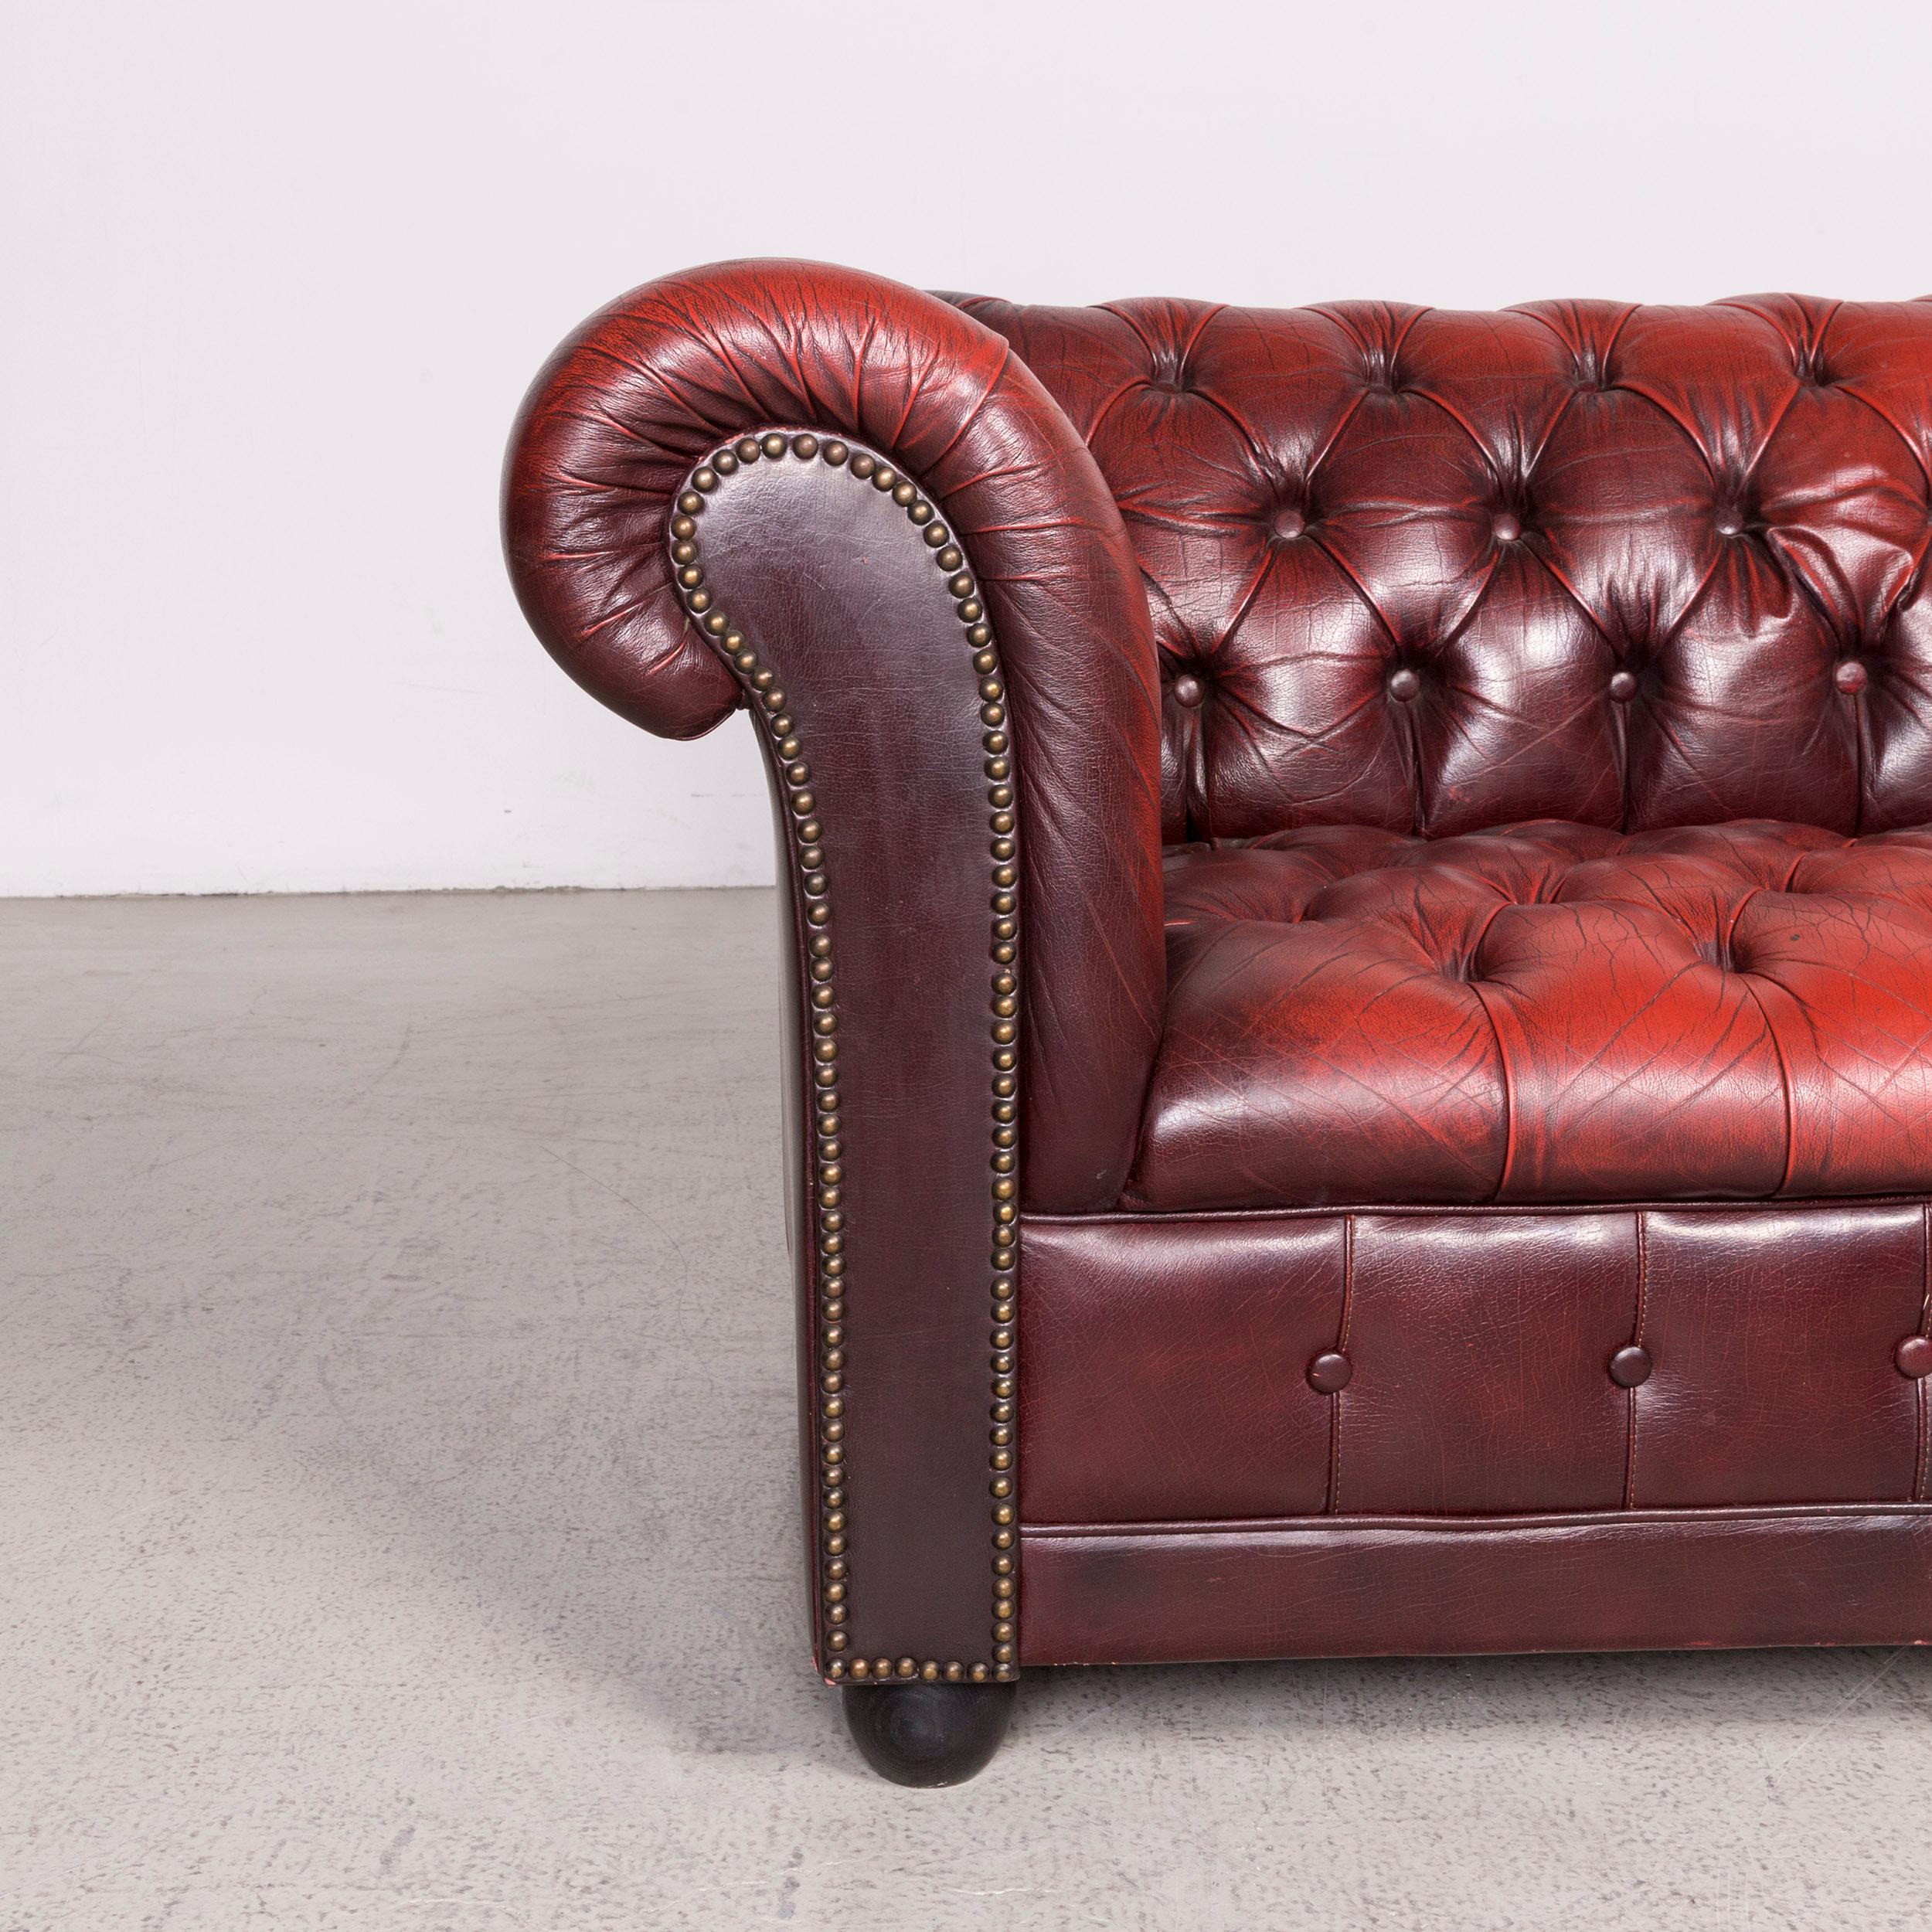 British Chesterfield Designer Leather Sofa Red Two-Seat Genuine Leather Vintage Retro For Sale